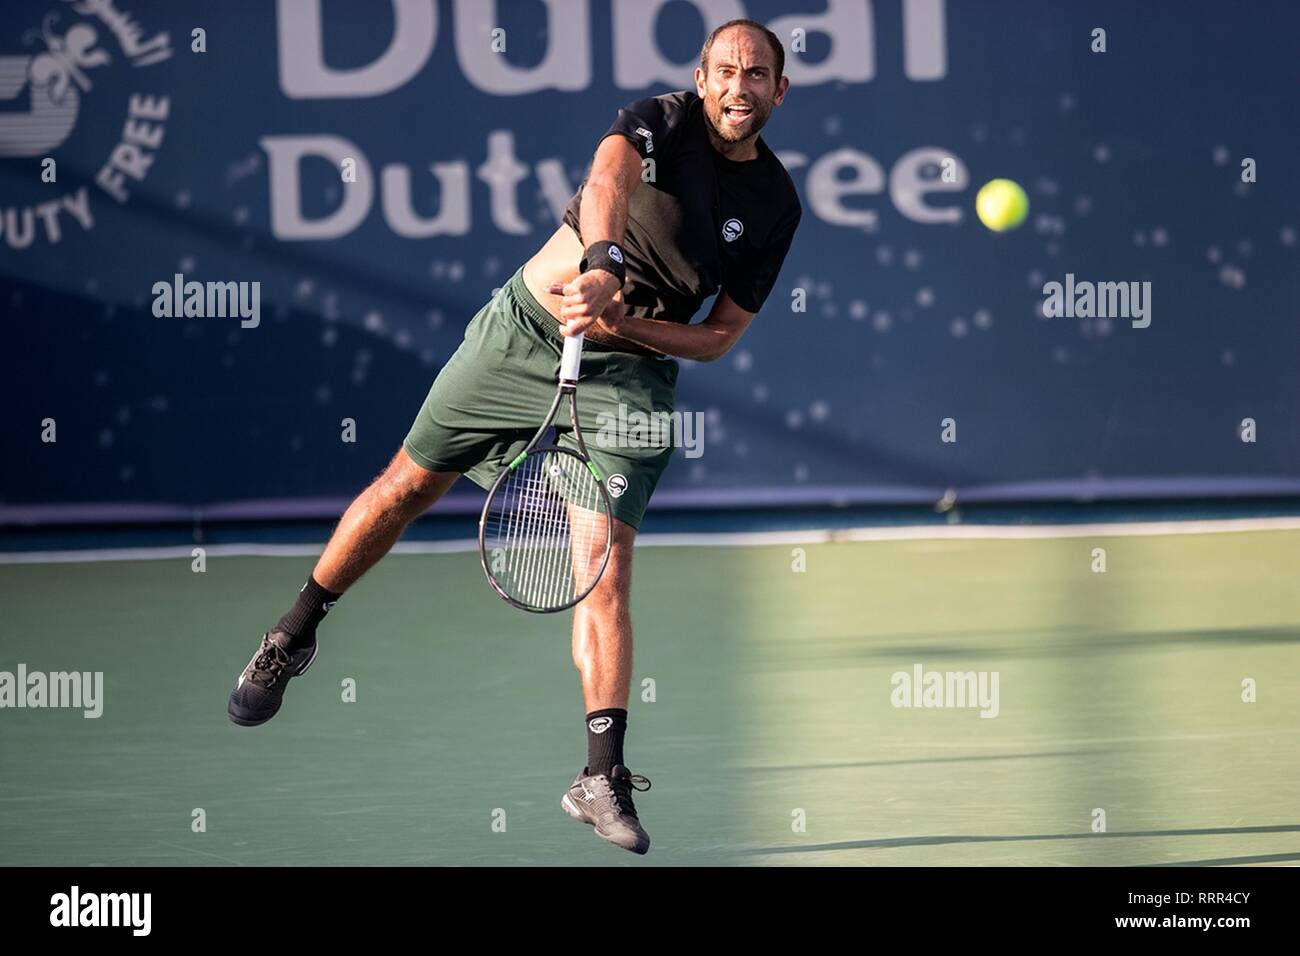 Dubai, United Arab Emirates. 26th Feb, 2019. Mohamed Safwat of Egypt serves  during the singles first round match between Marcos Baghdatis of Cyprus and  Mohamed Safwat of Egypt at the ATP Dubai